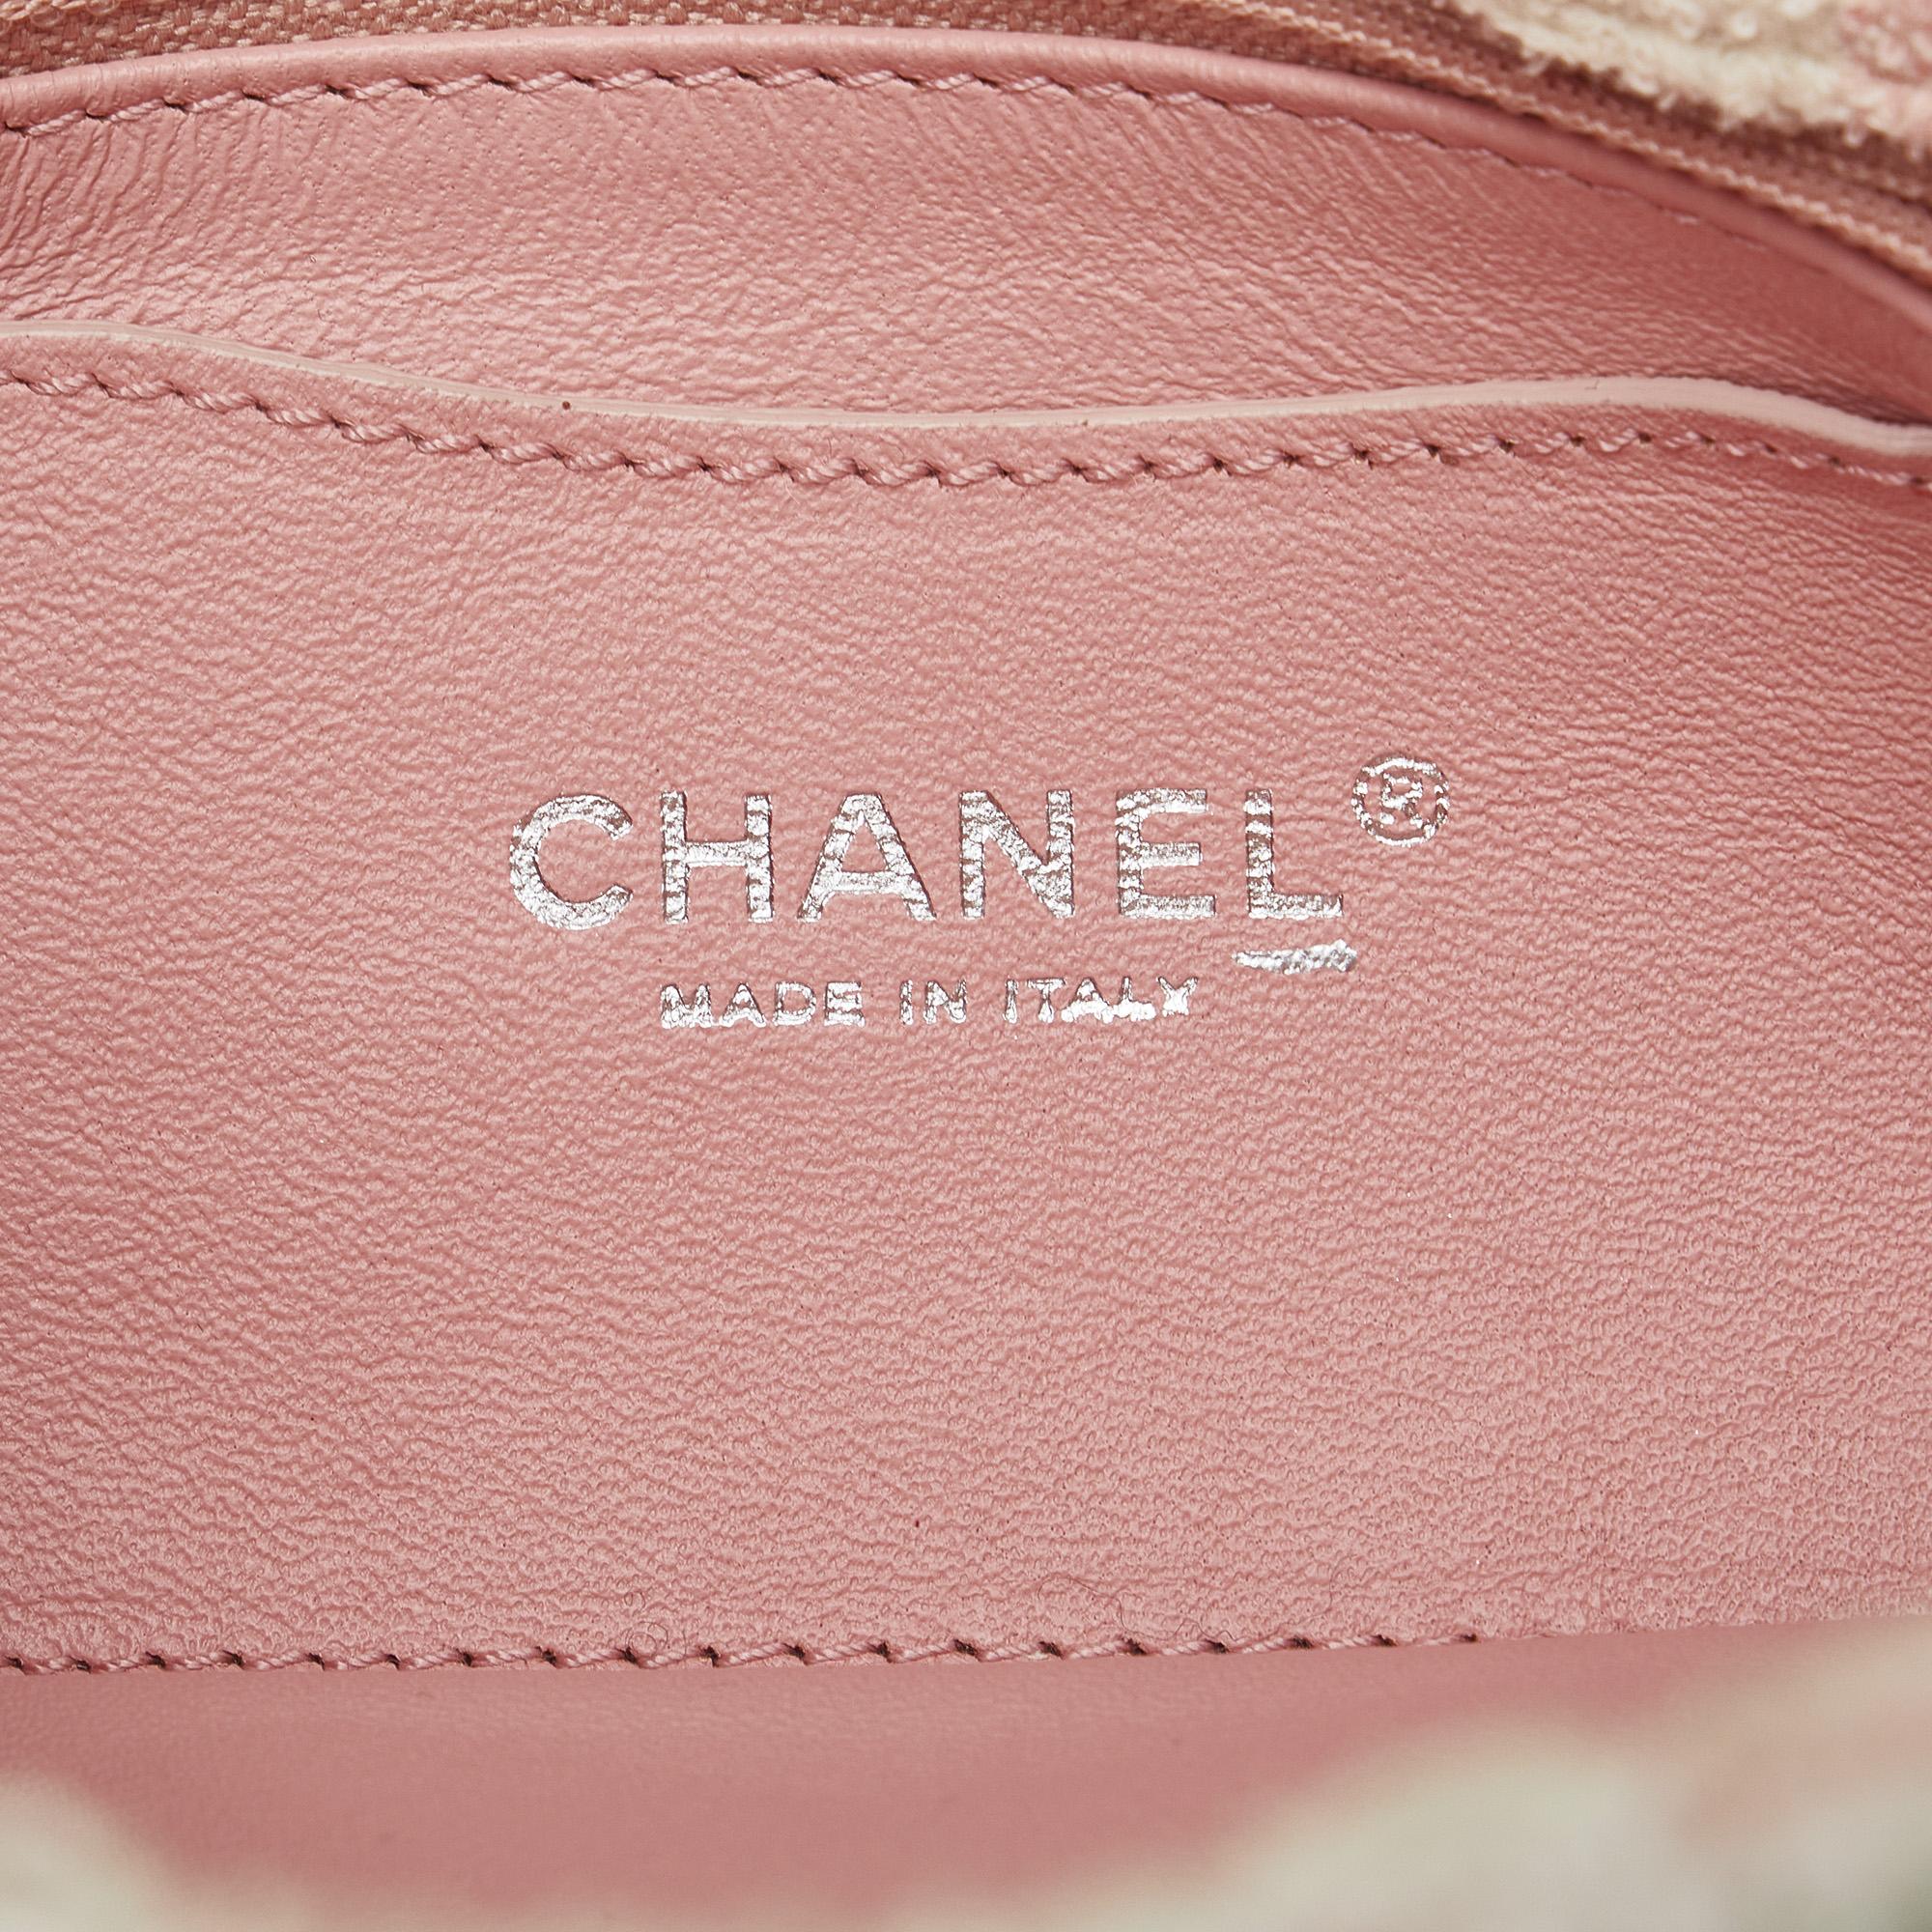 Chanel Pink Small Tweed Just Mademoiselle Bowler Bag